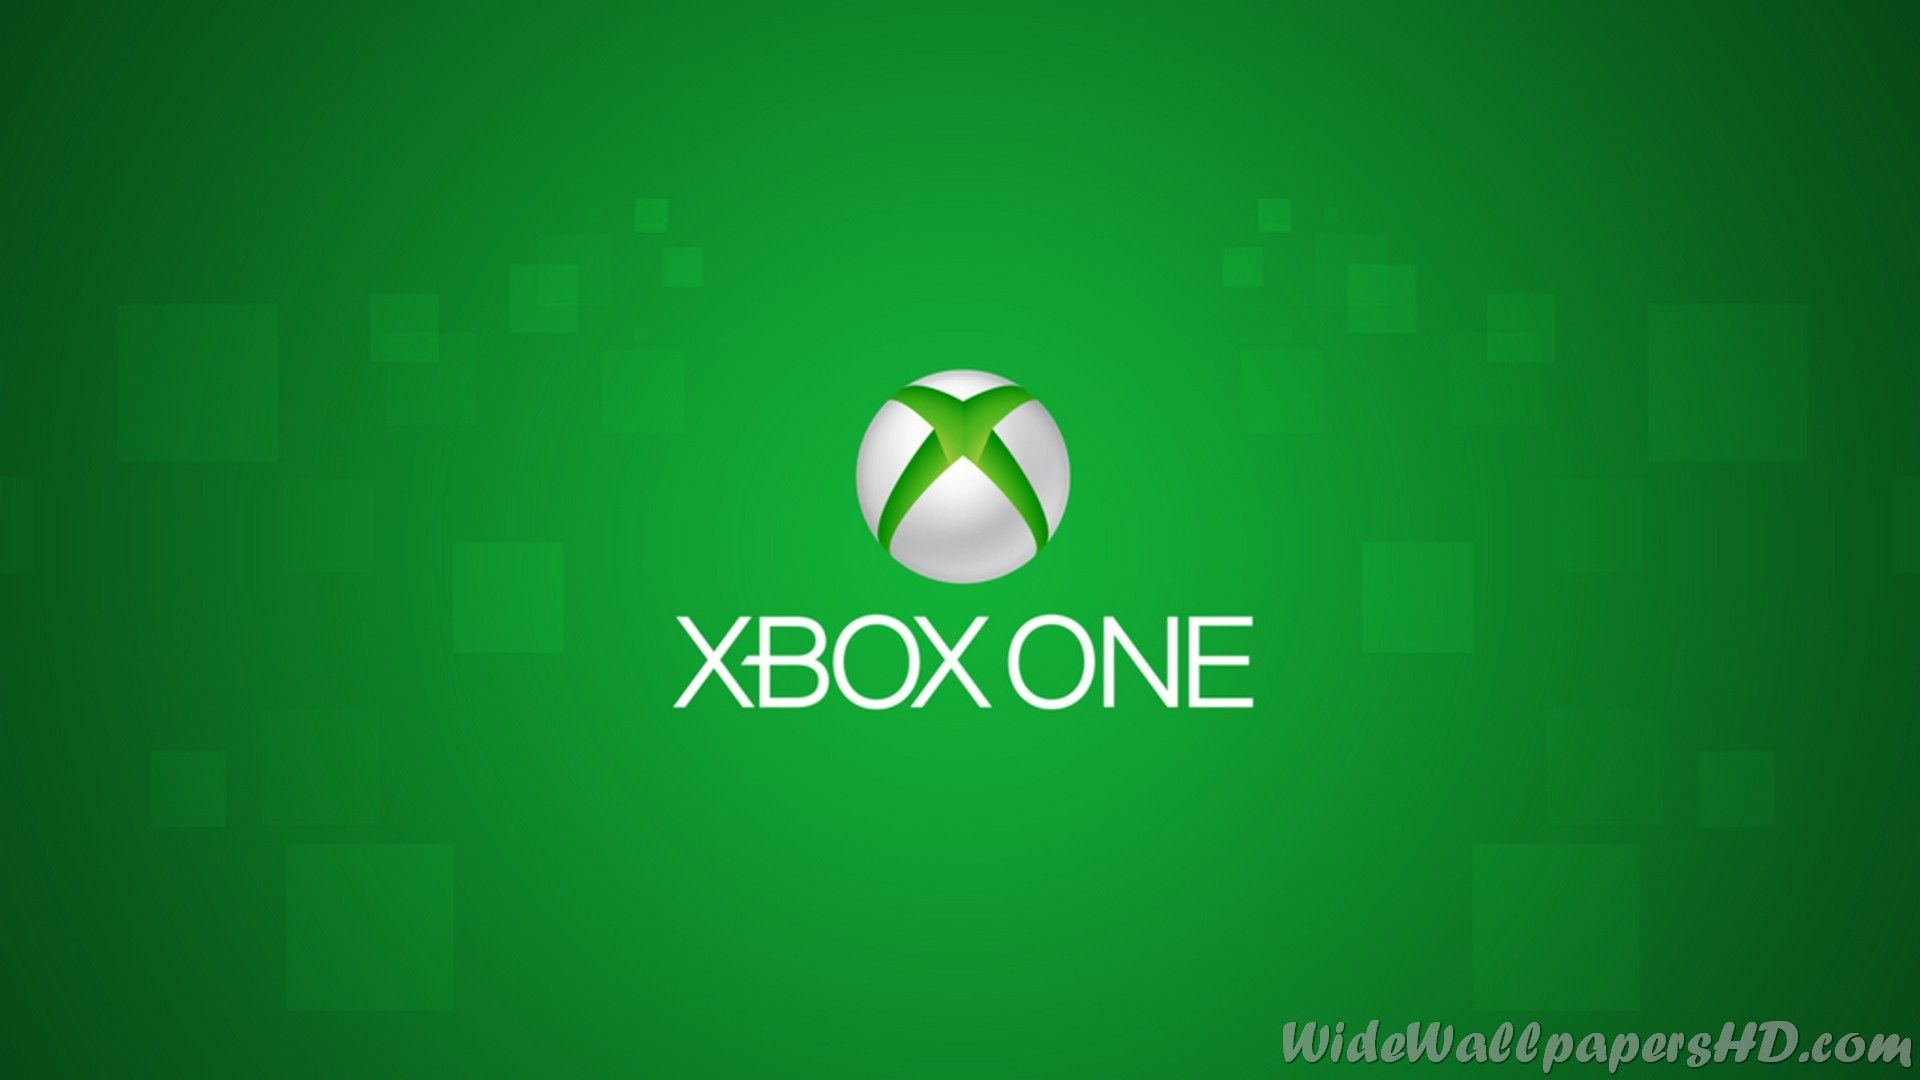 Xbox One HD Image One Wallpaper & Background Download